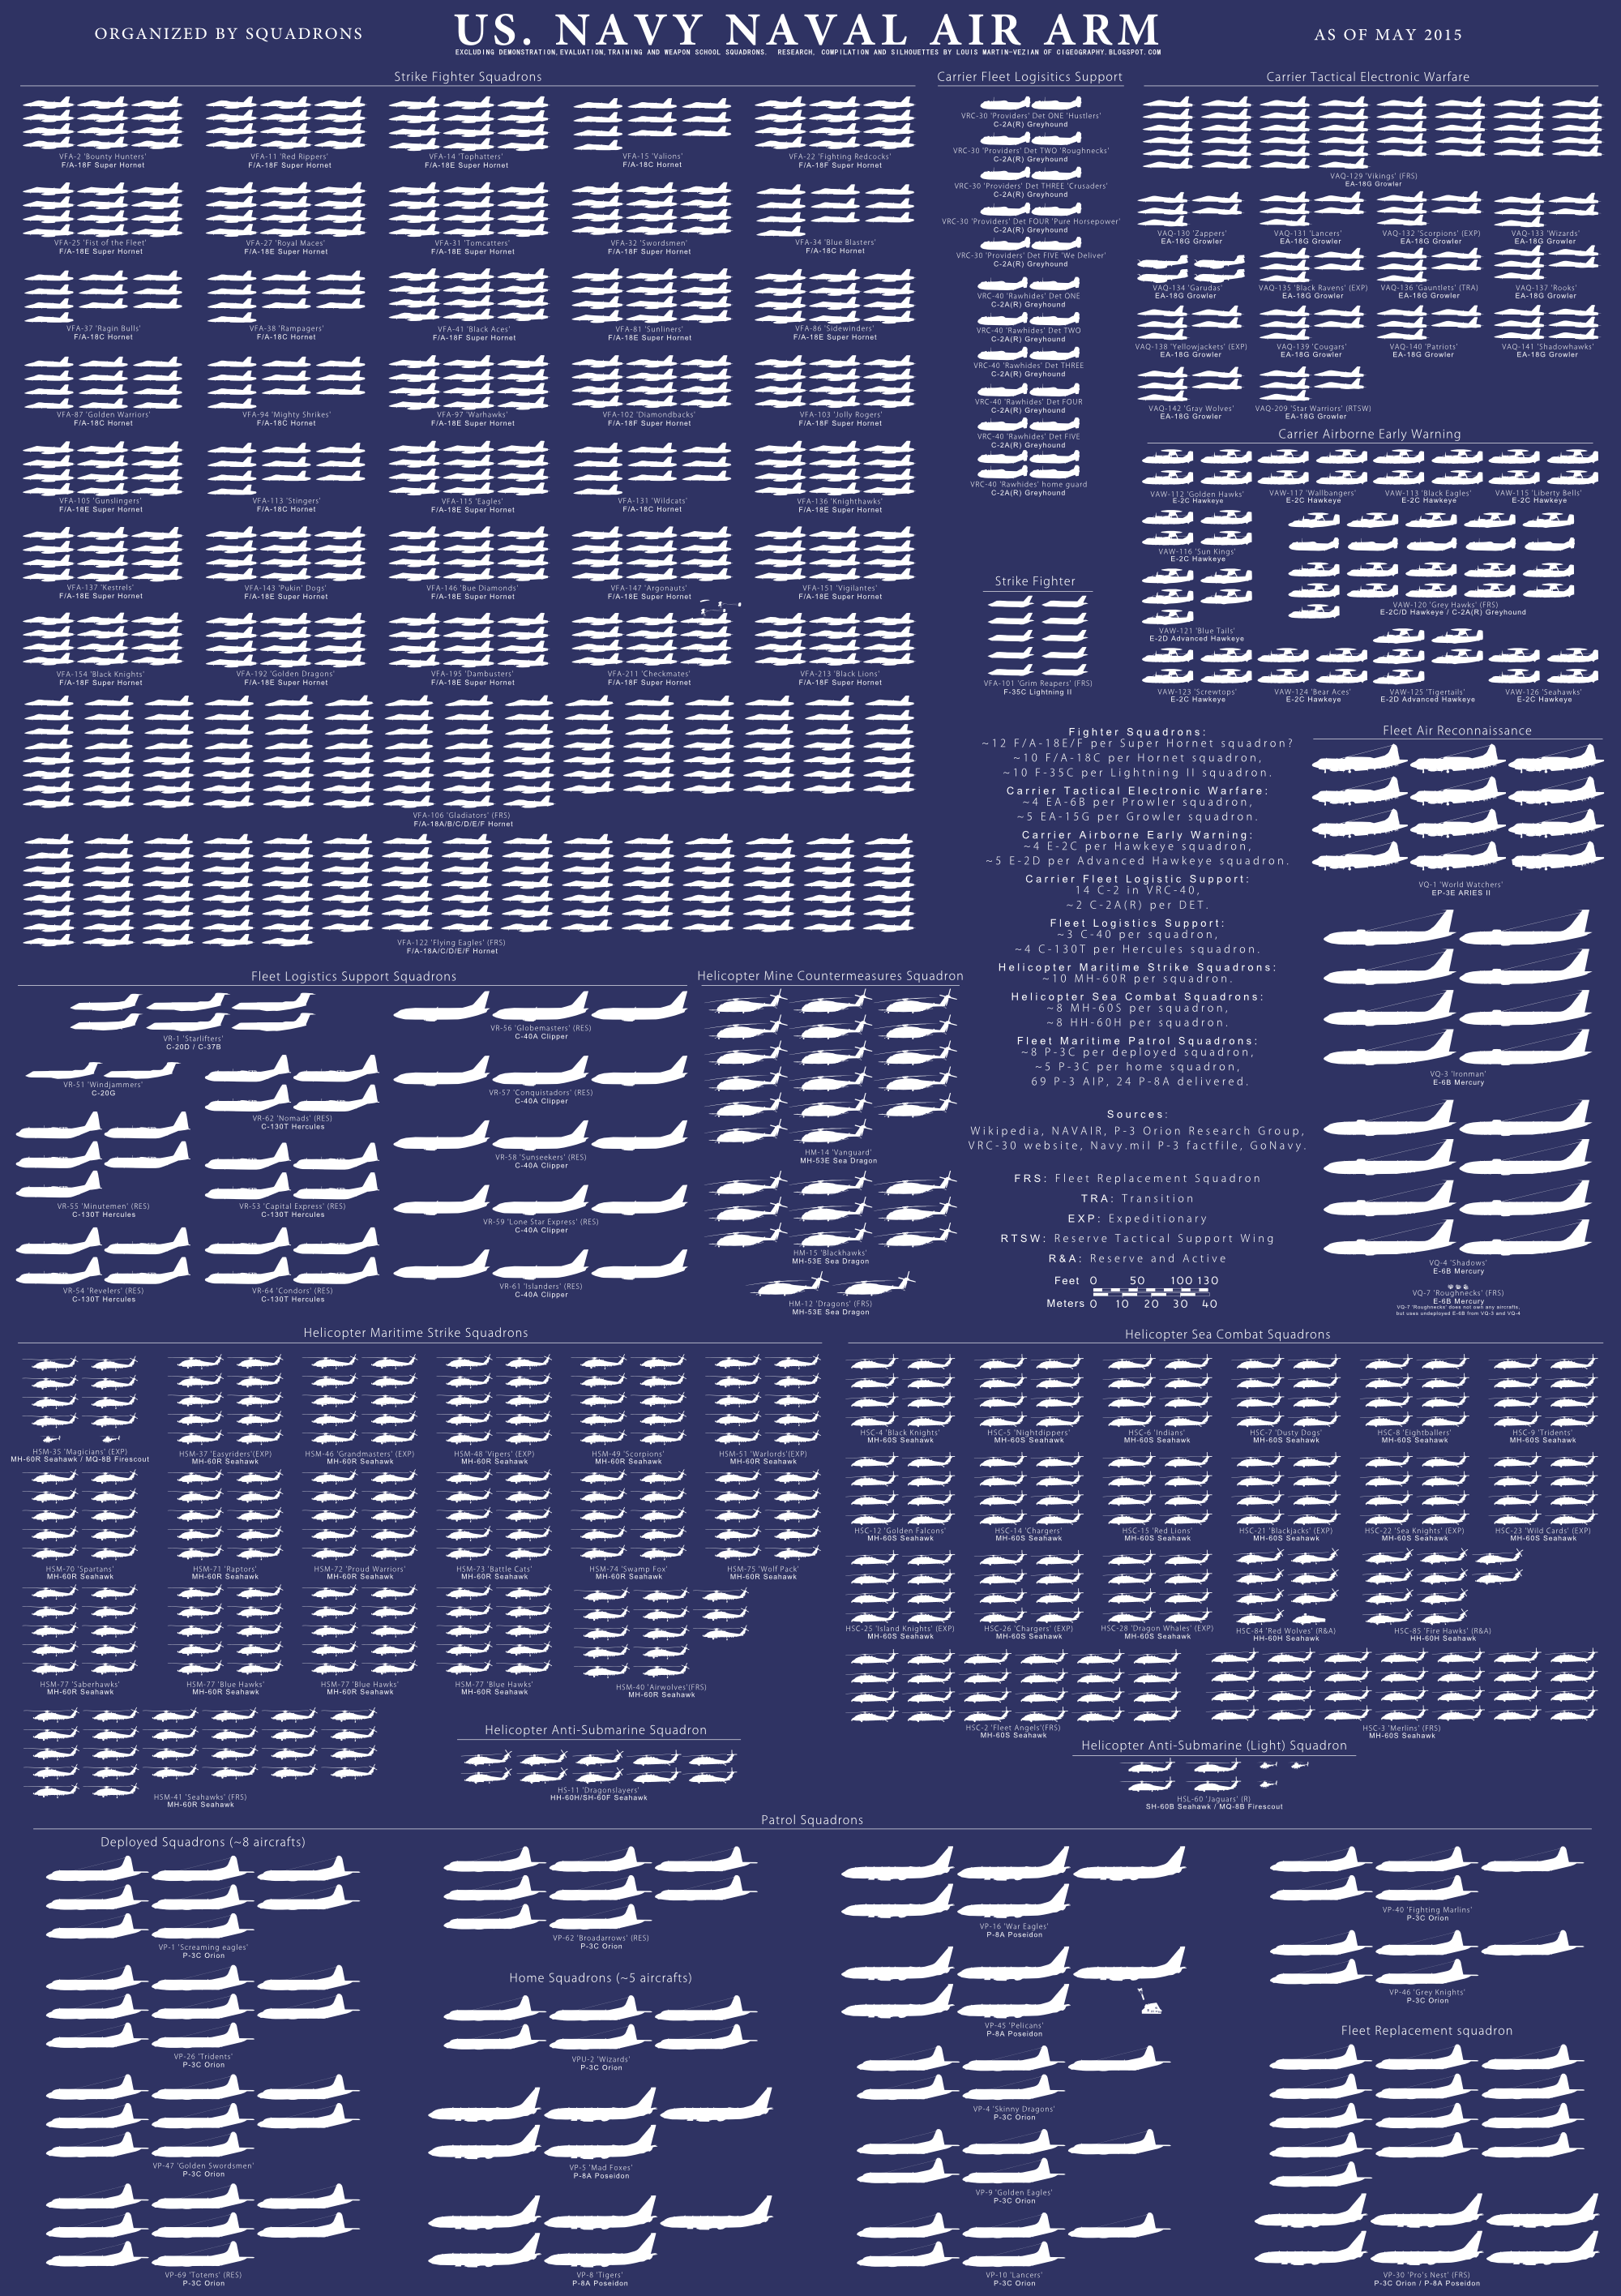 Navy Military Pay Chart 2015